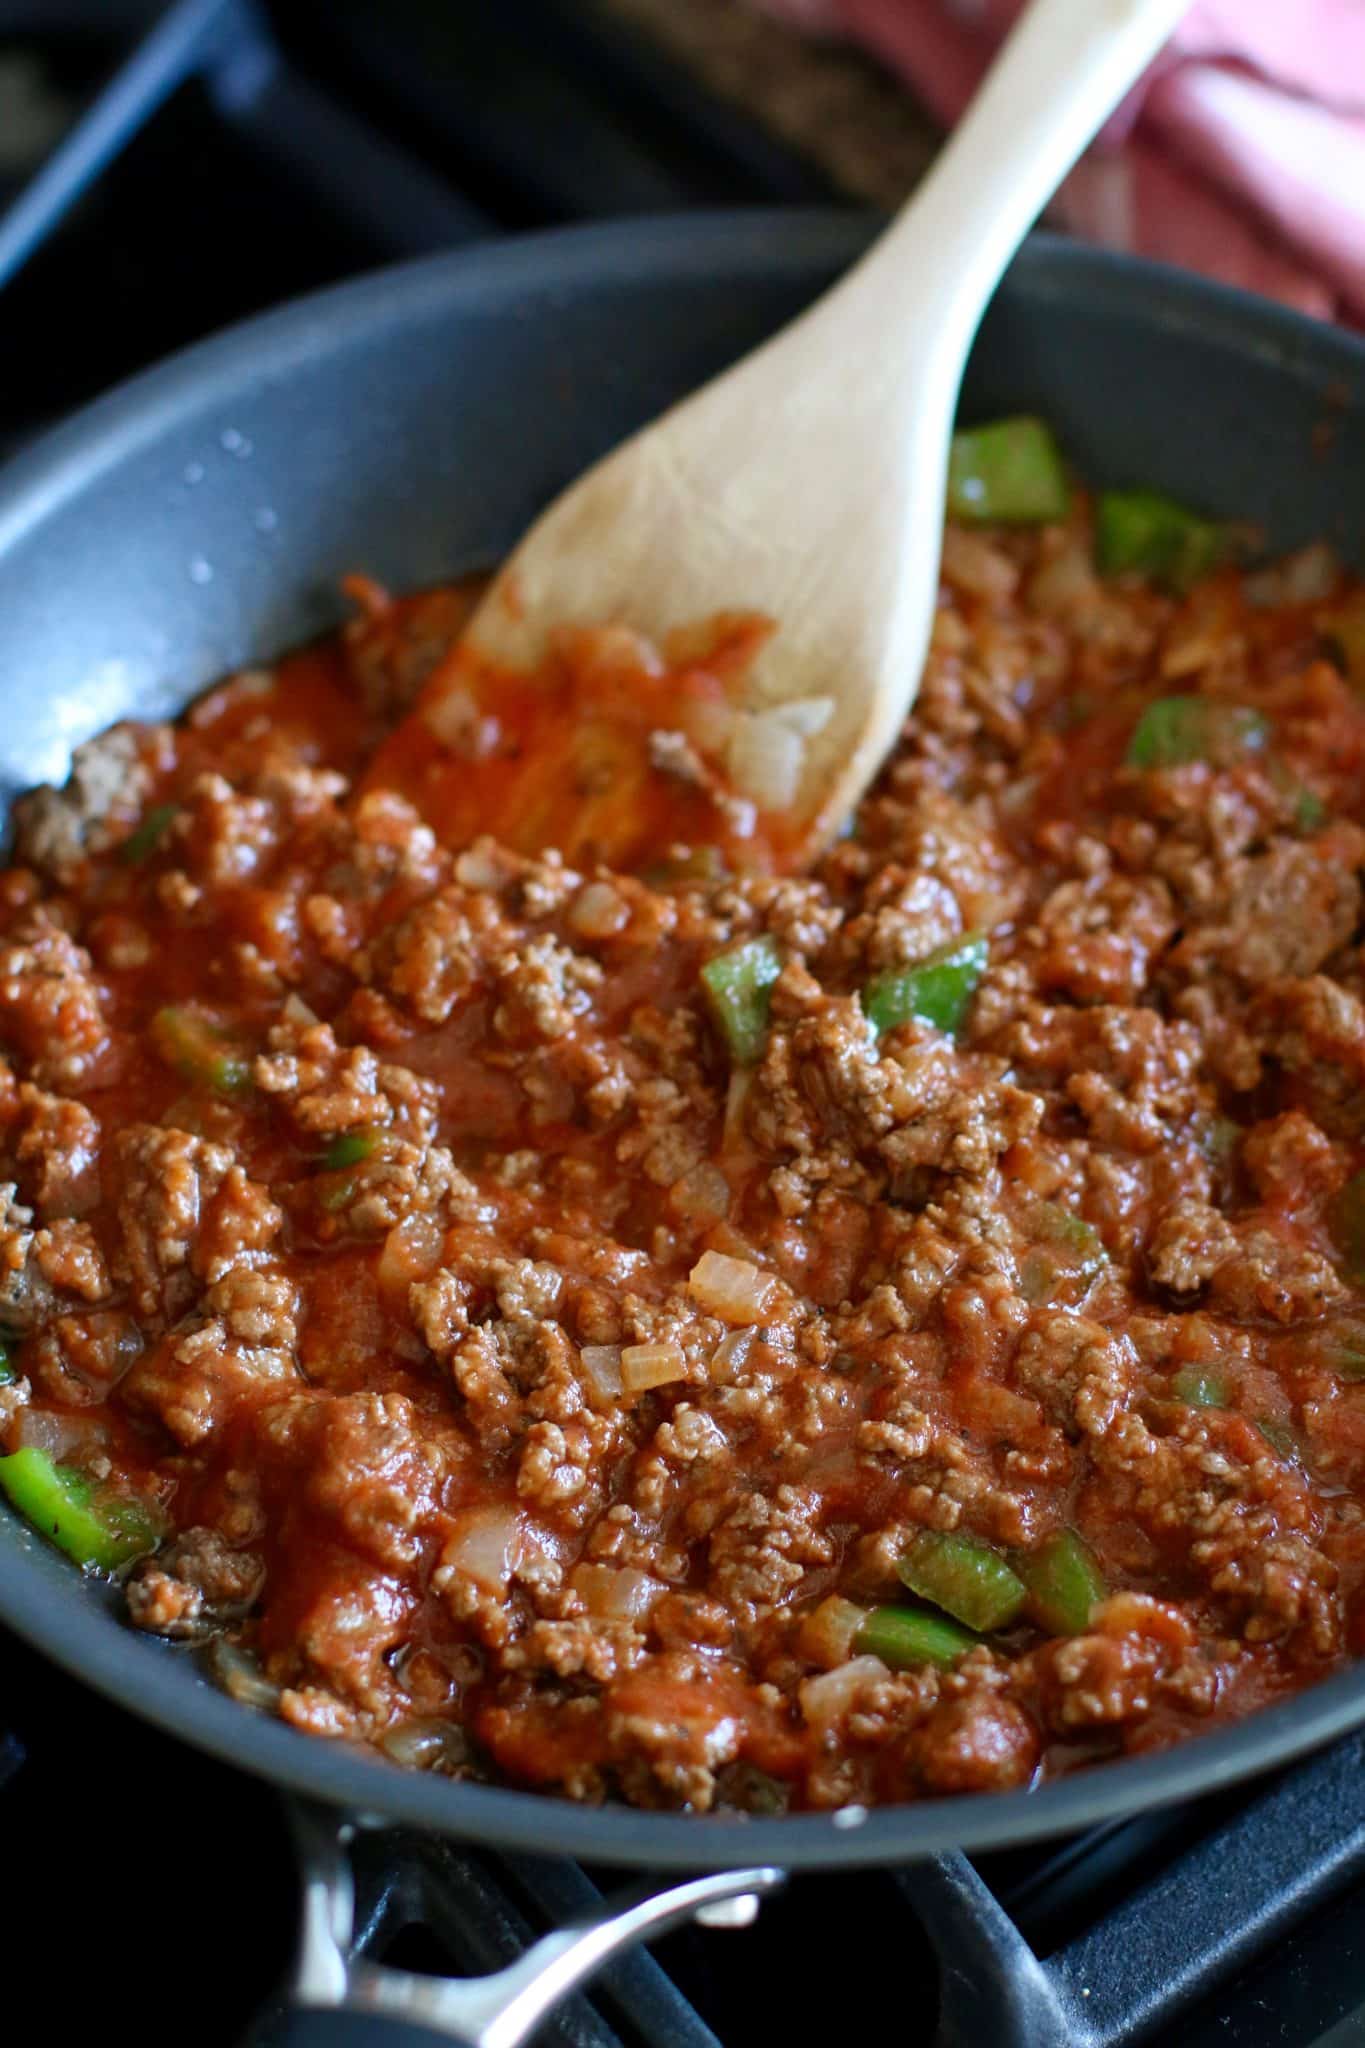 pizza sauce added to cooked ground beef mix.